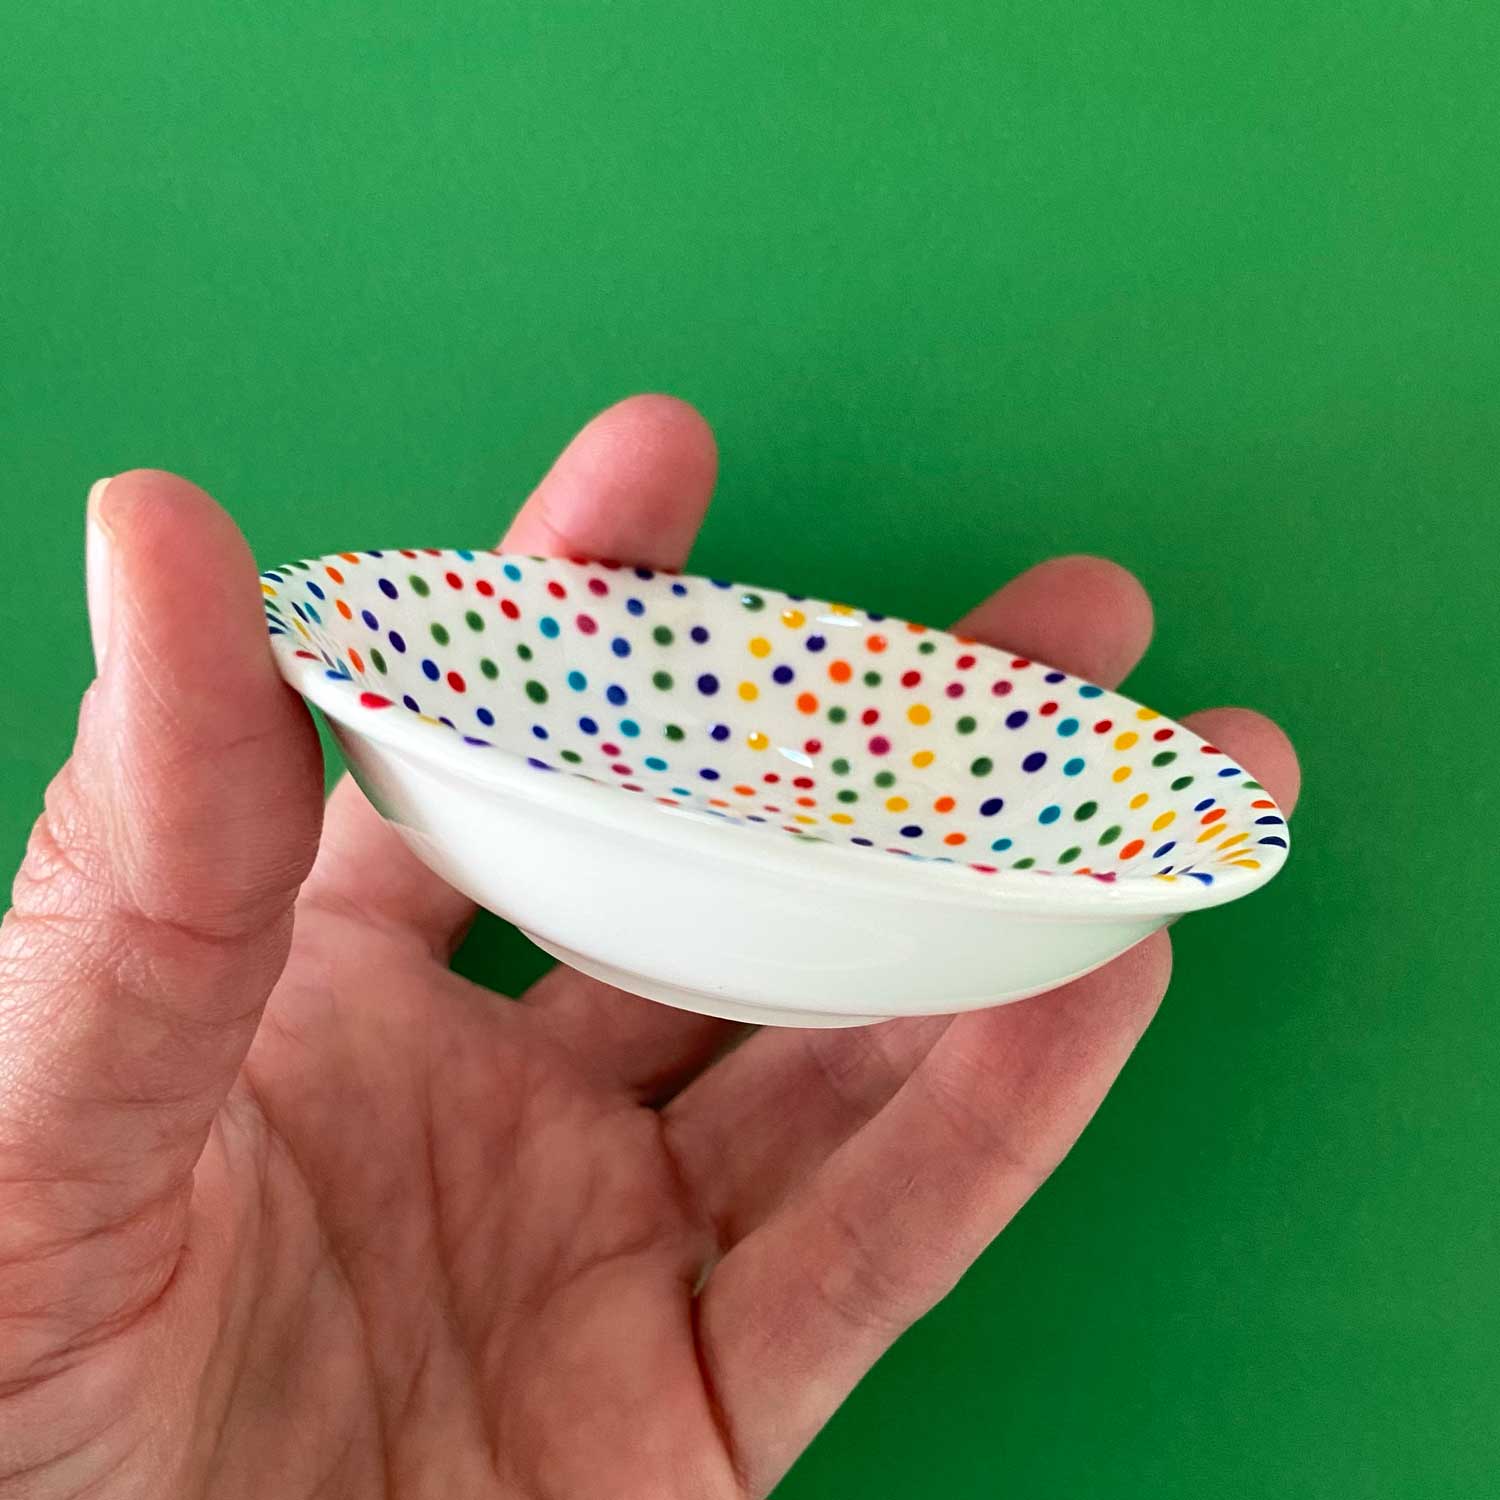 Rainbow Dot 12 - Hand Painted Porcelain Round Bowl